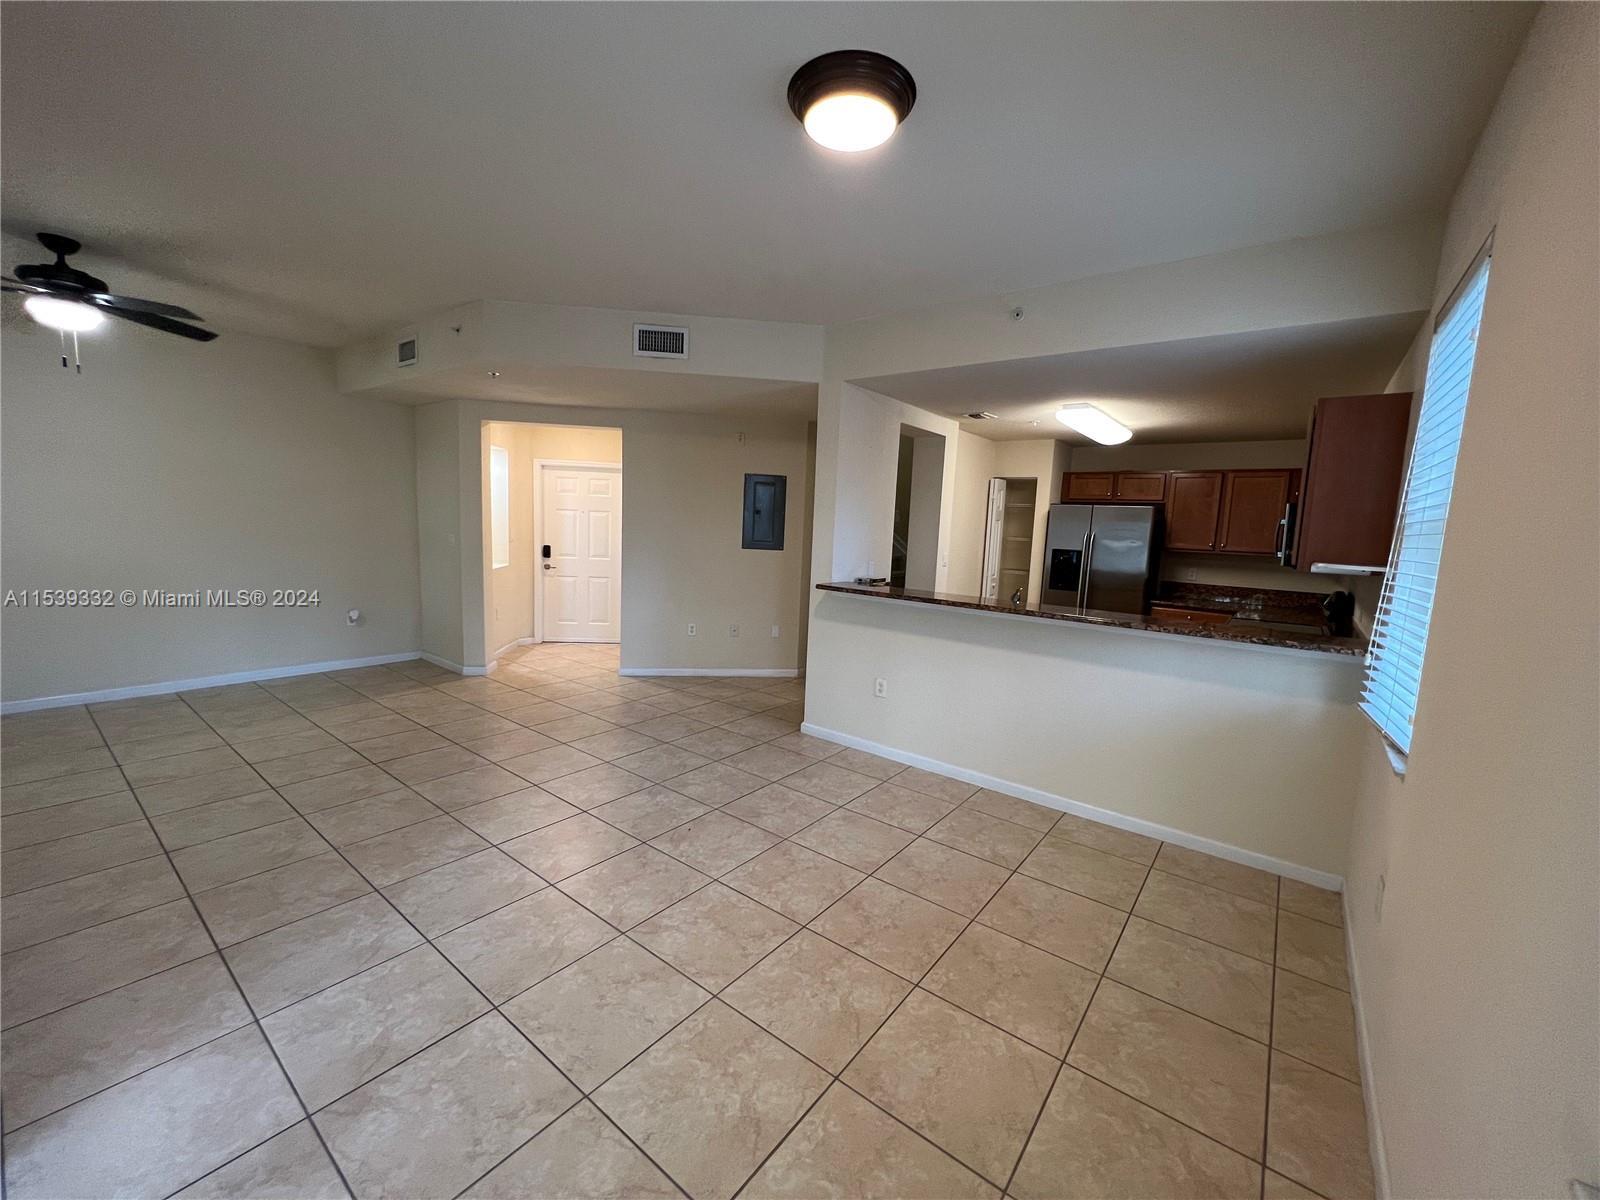 Photo of 11501 NW 89th St #202 in Doral, FL